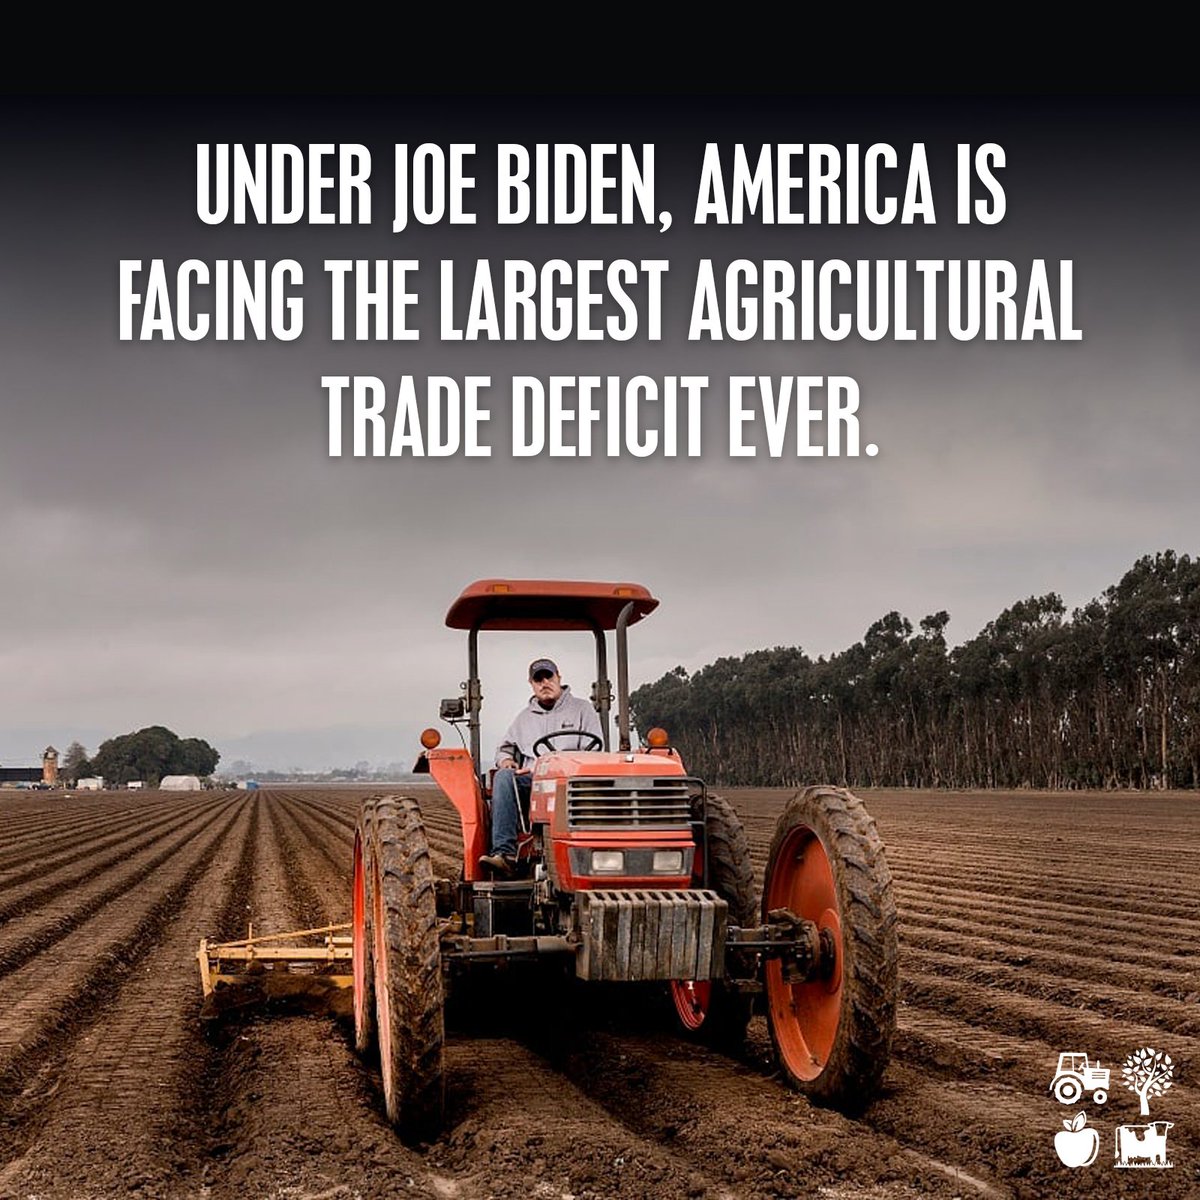 Joe Biden has been a disaster for agricultural trade. Our #FarmBill doubles funding for the Market Access Program (MAP) and Foreign Market Development (FMD) program so our producers can mitigate global food insecurity while accessing new markets, and improving local economies.